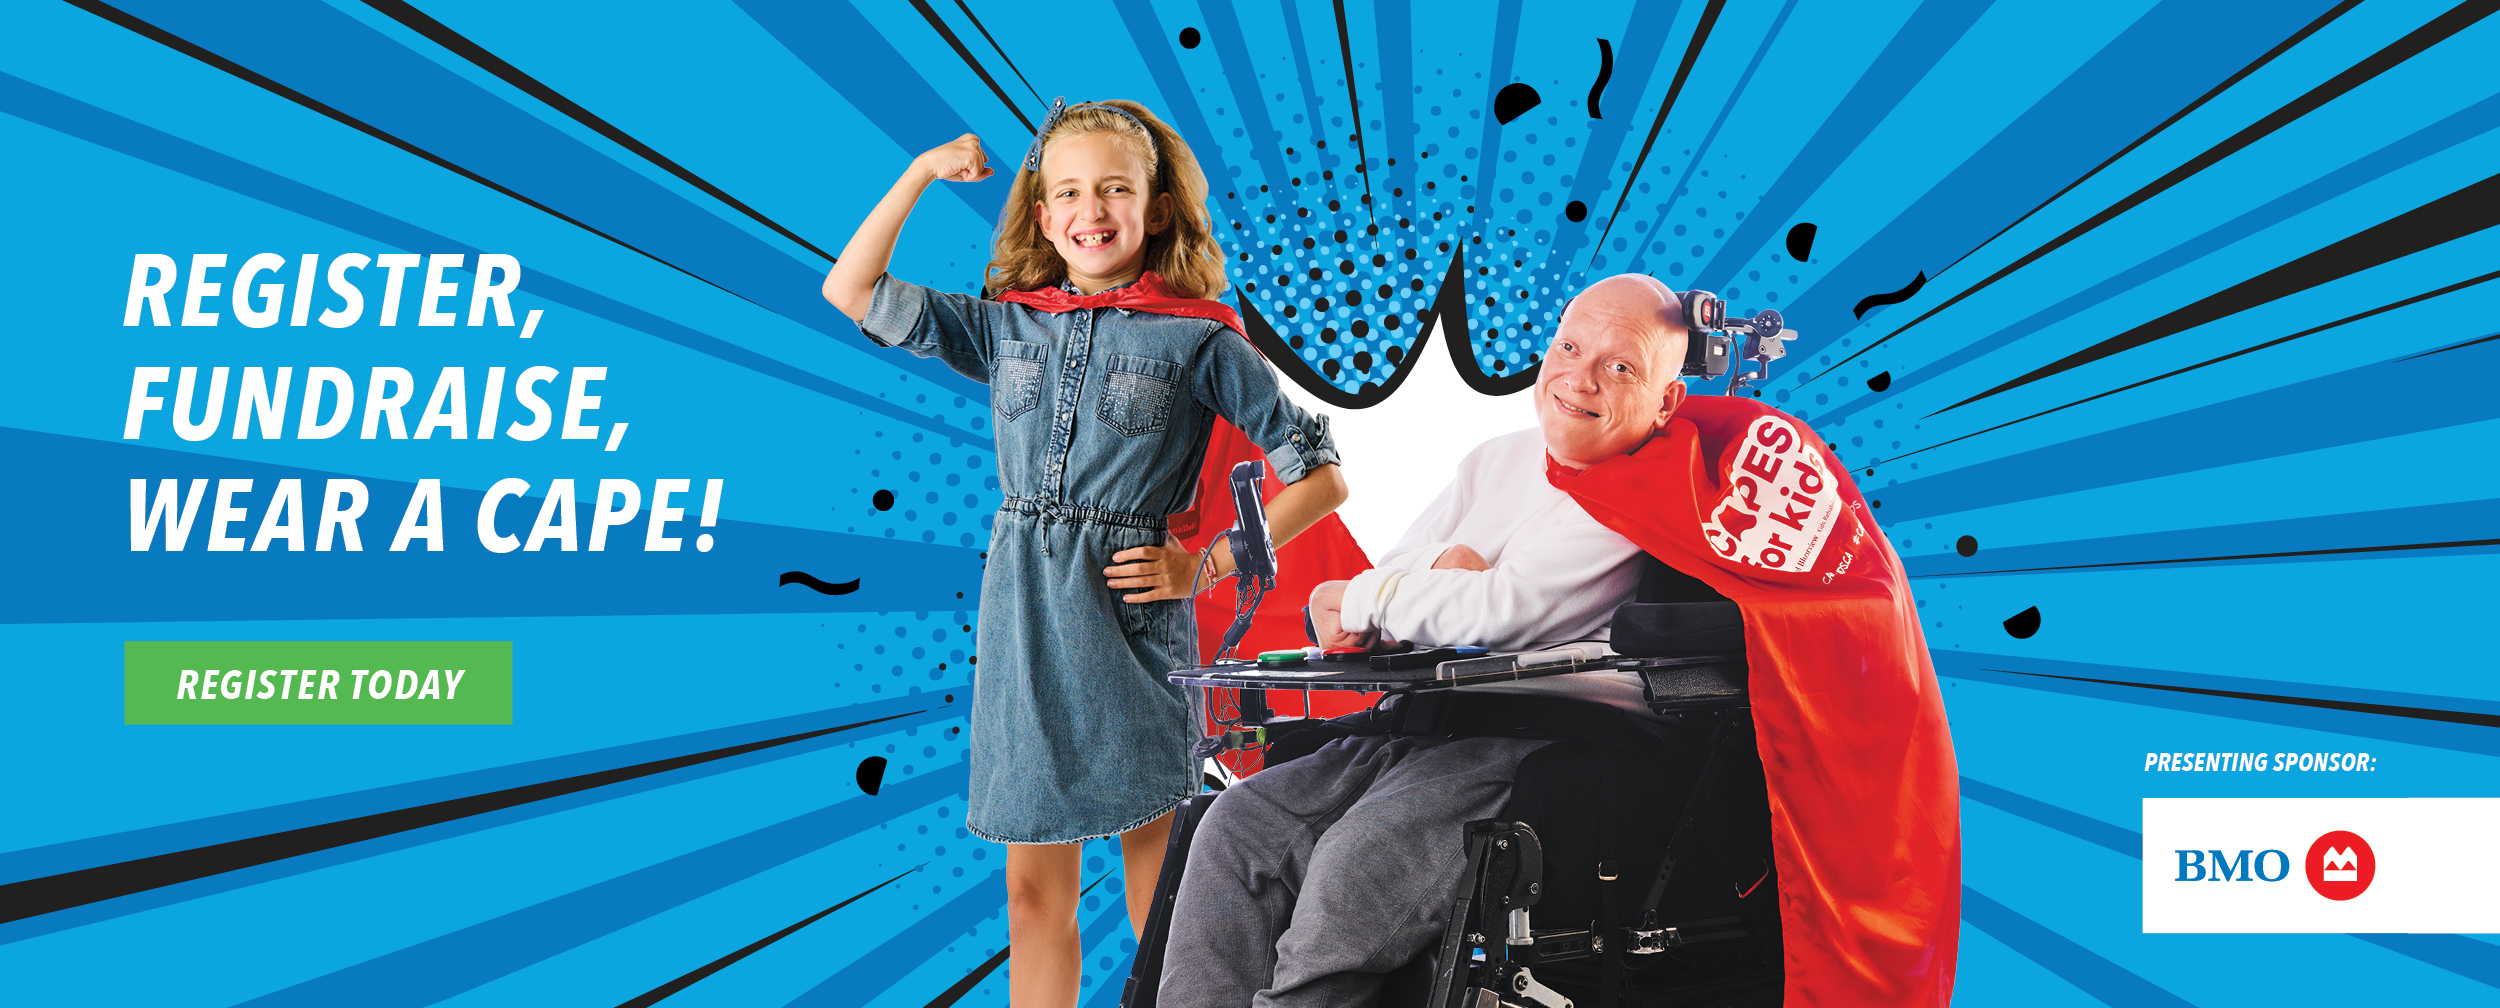 A child standing with a red cape on the left, and an adult sitting on a wheelchair on the right